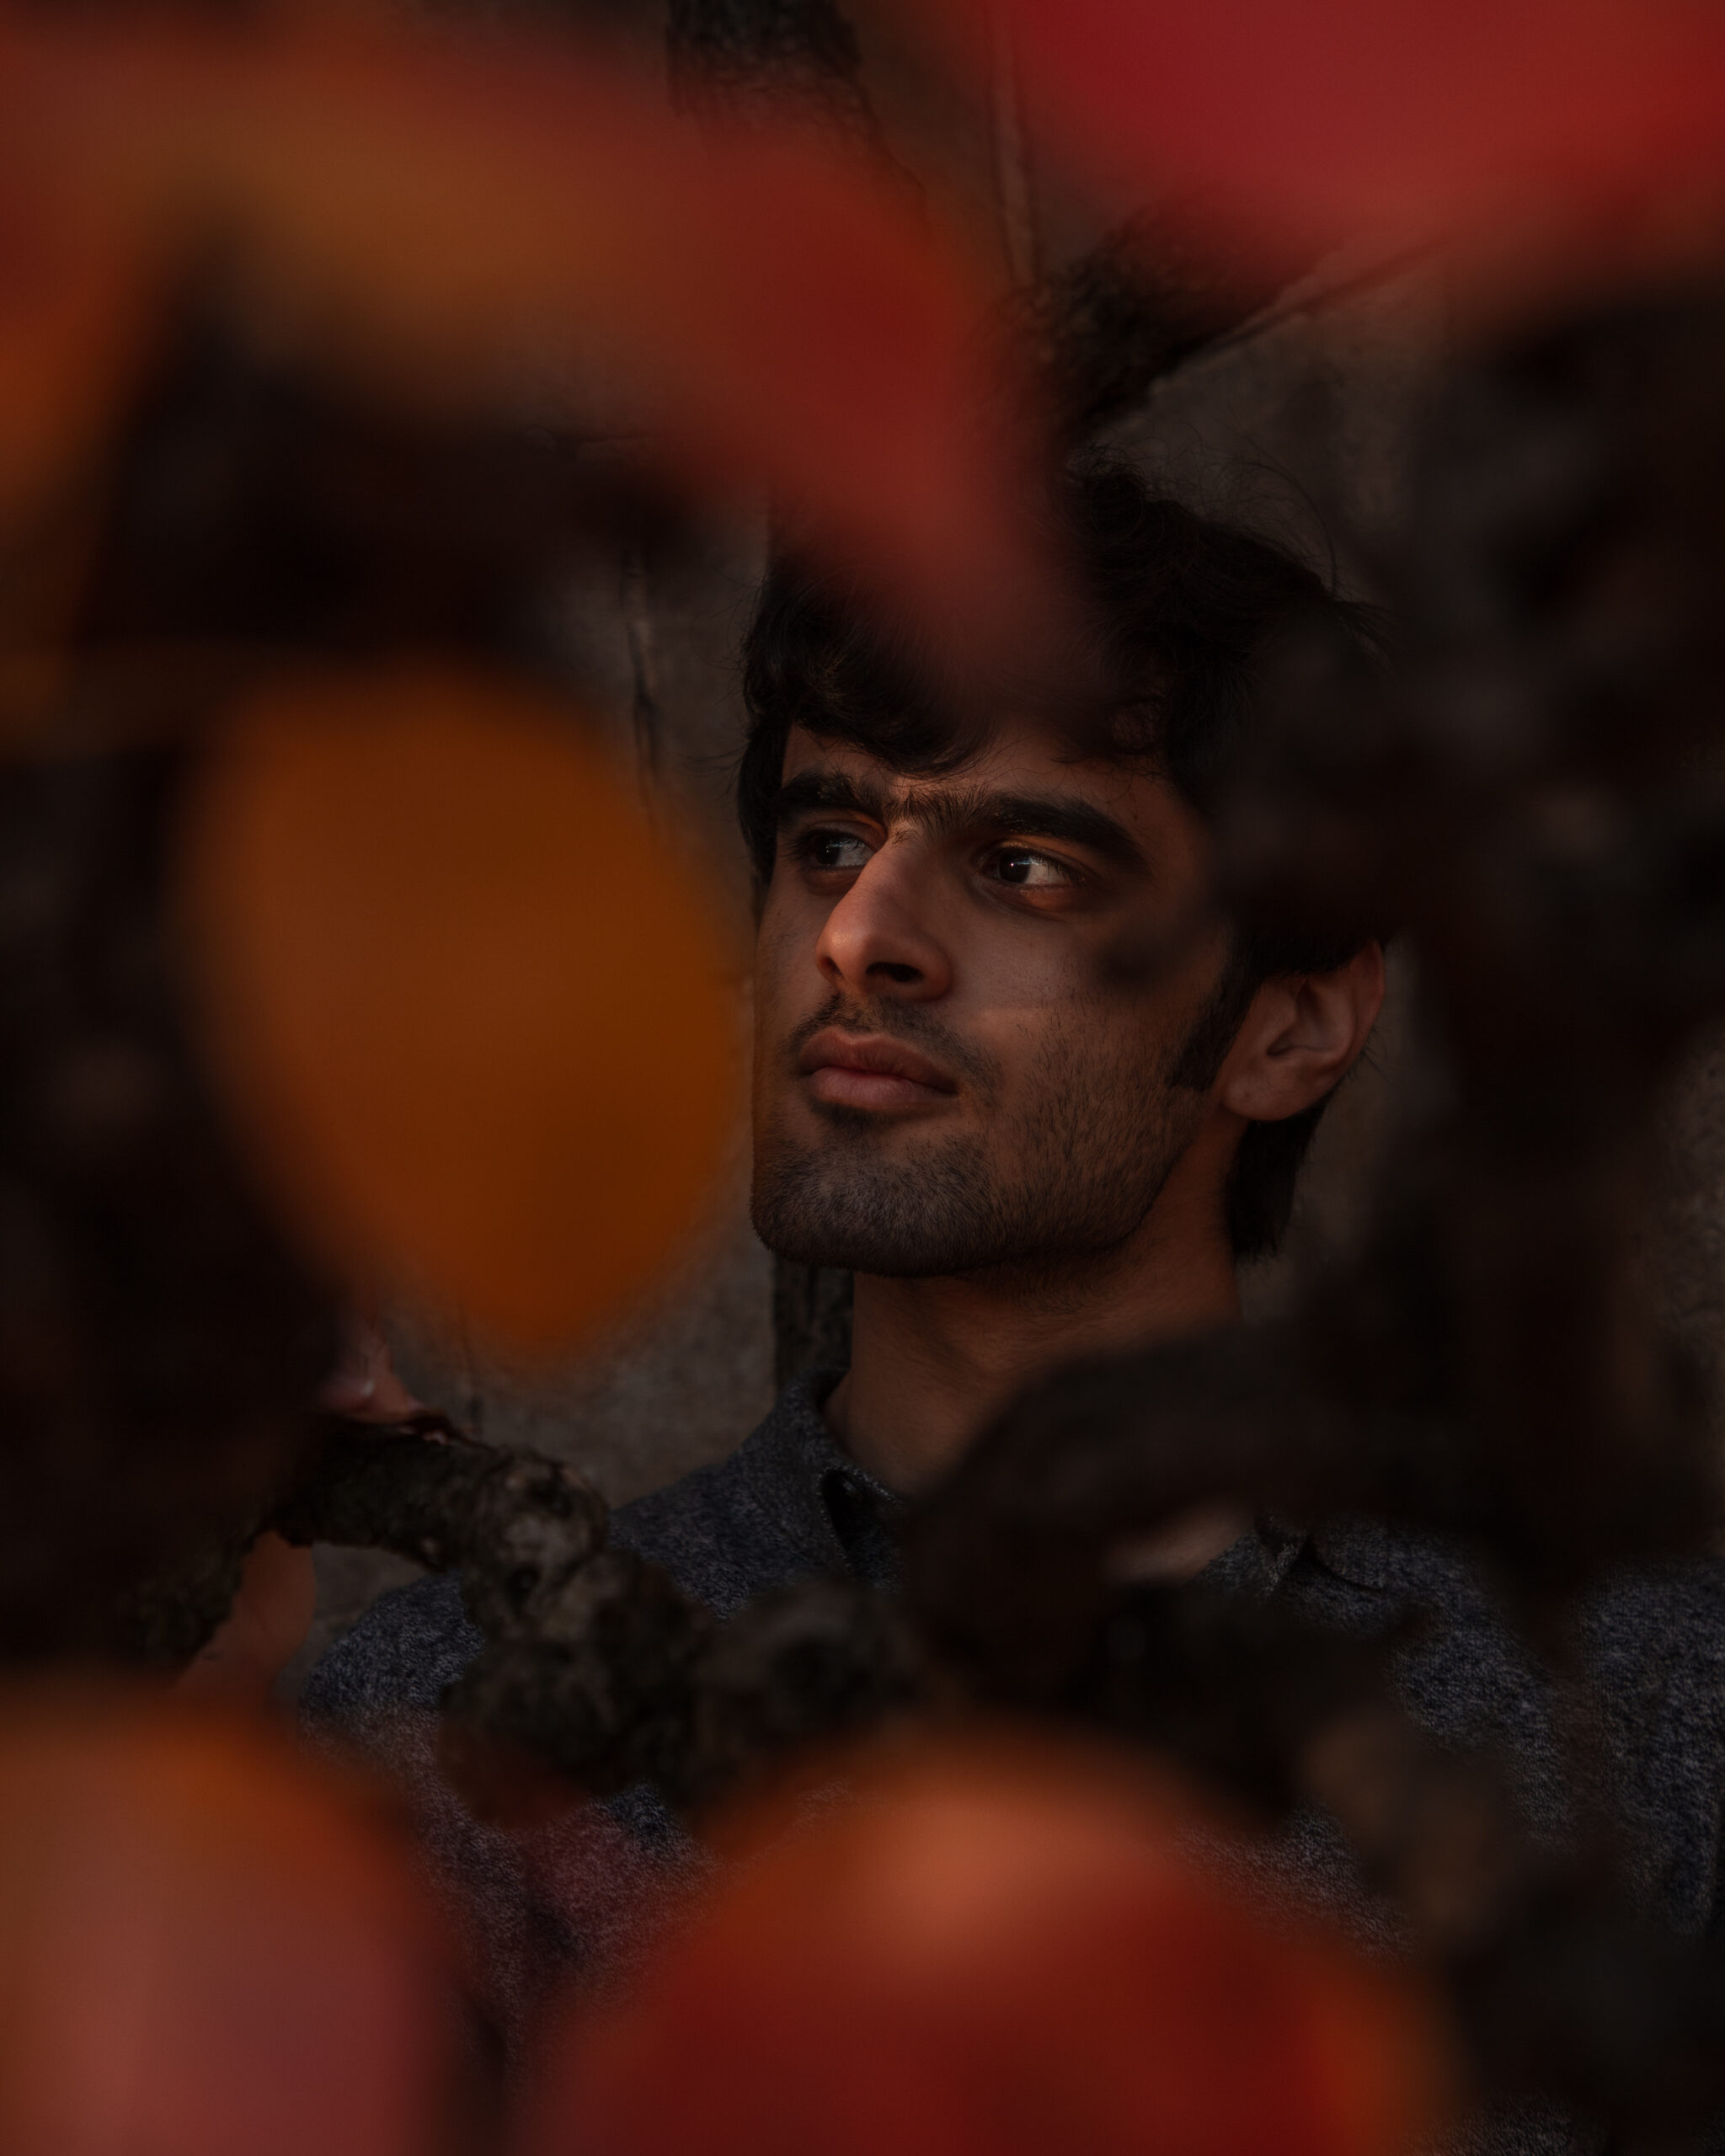 The photo shows a man with dark curly hair and a beard, his gaze directed off to the side. The foreground features out-of-focus orange leaves, creating a frame around his face. The man is wearing a grey shirt, and the background has a muted tone, putting emphasis on his face